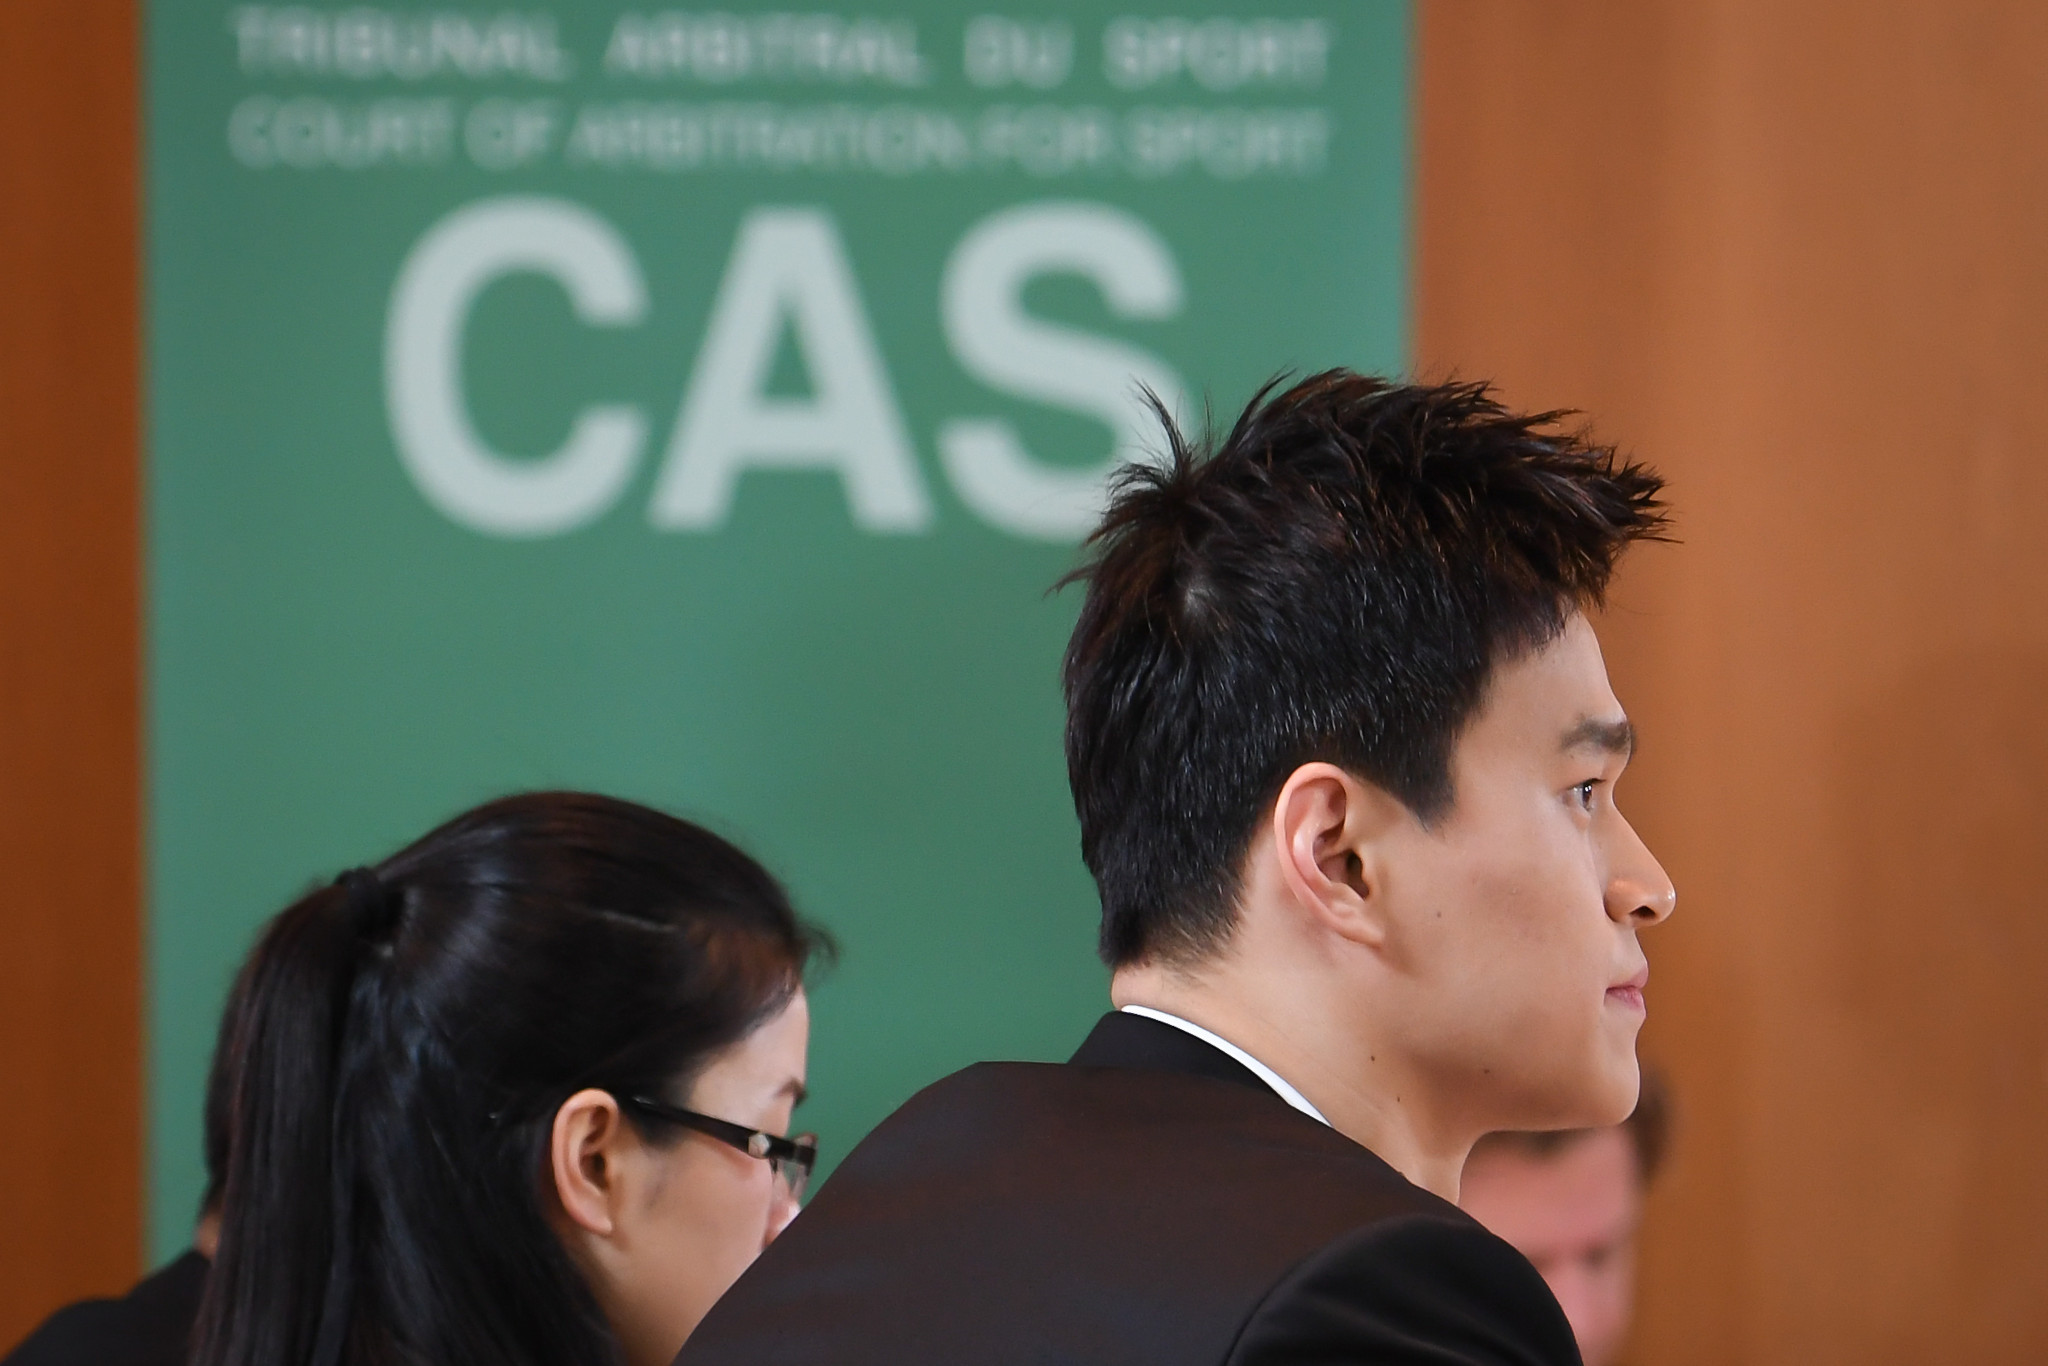 Sun Yang was present for a 10-hour public hearing at the Court of Arbitration for Sport ©Getty Images